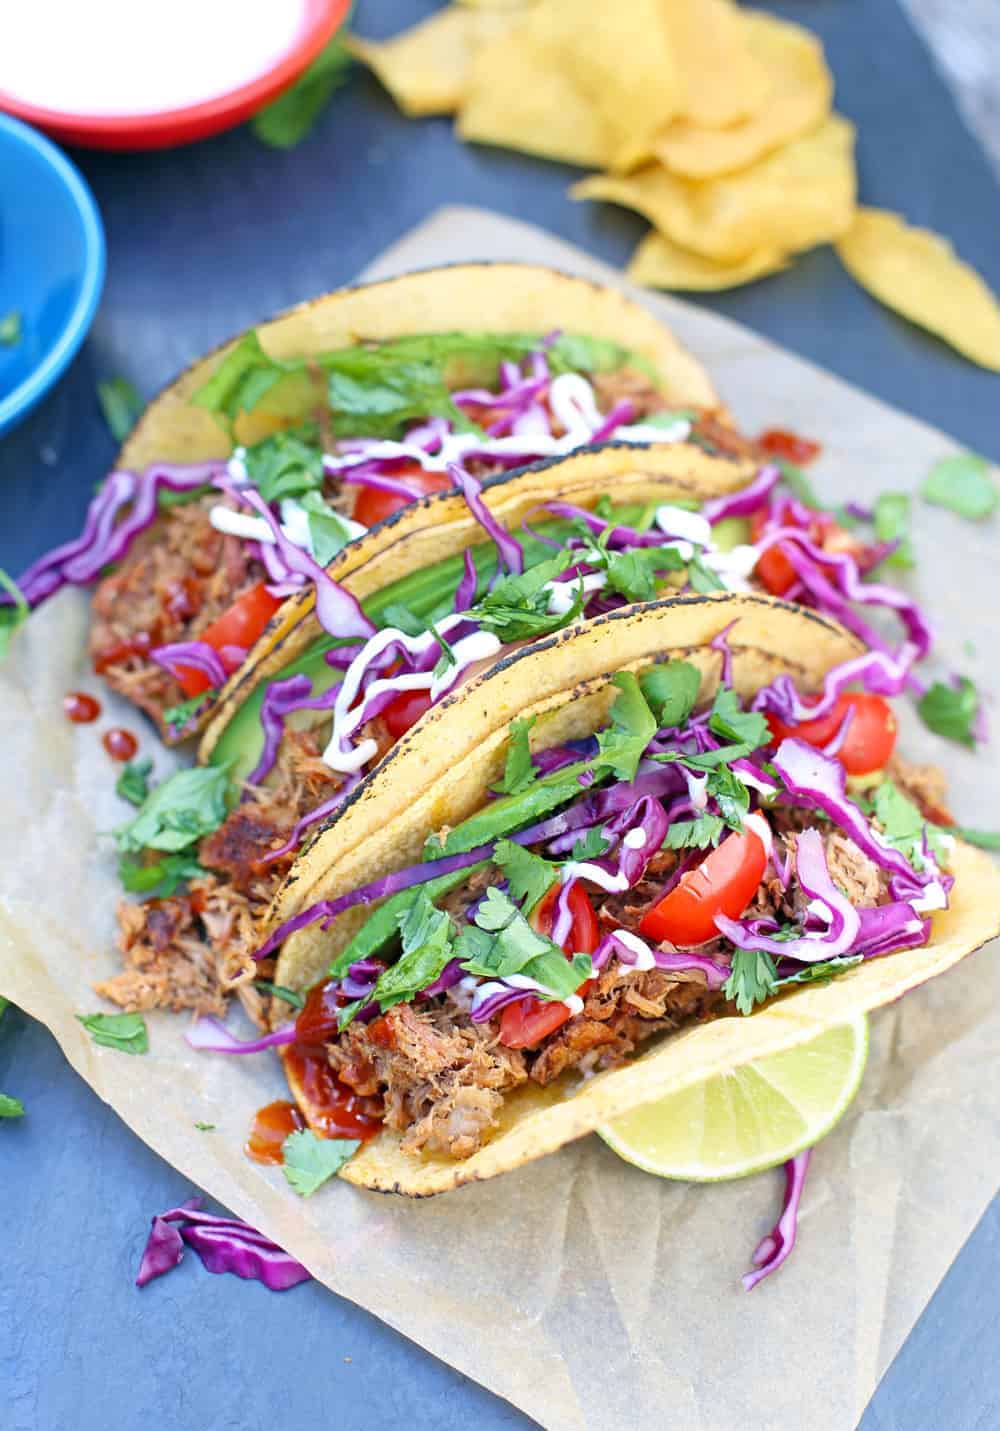 Smoked Pulled Pork Tacos